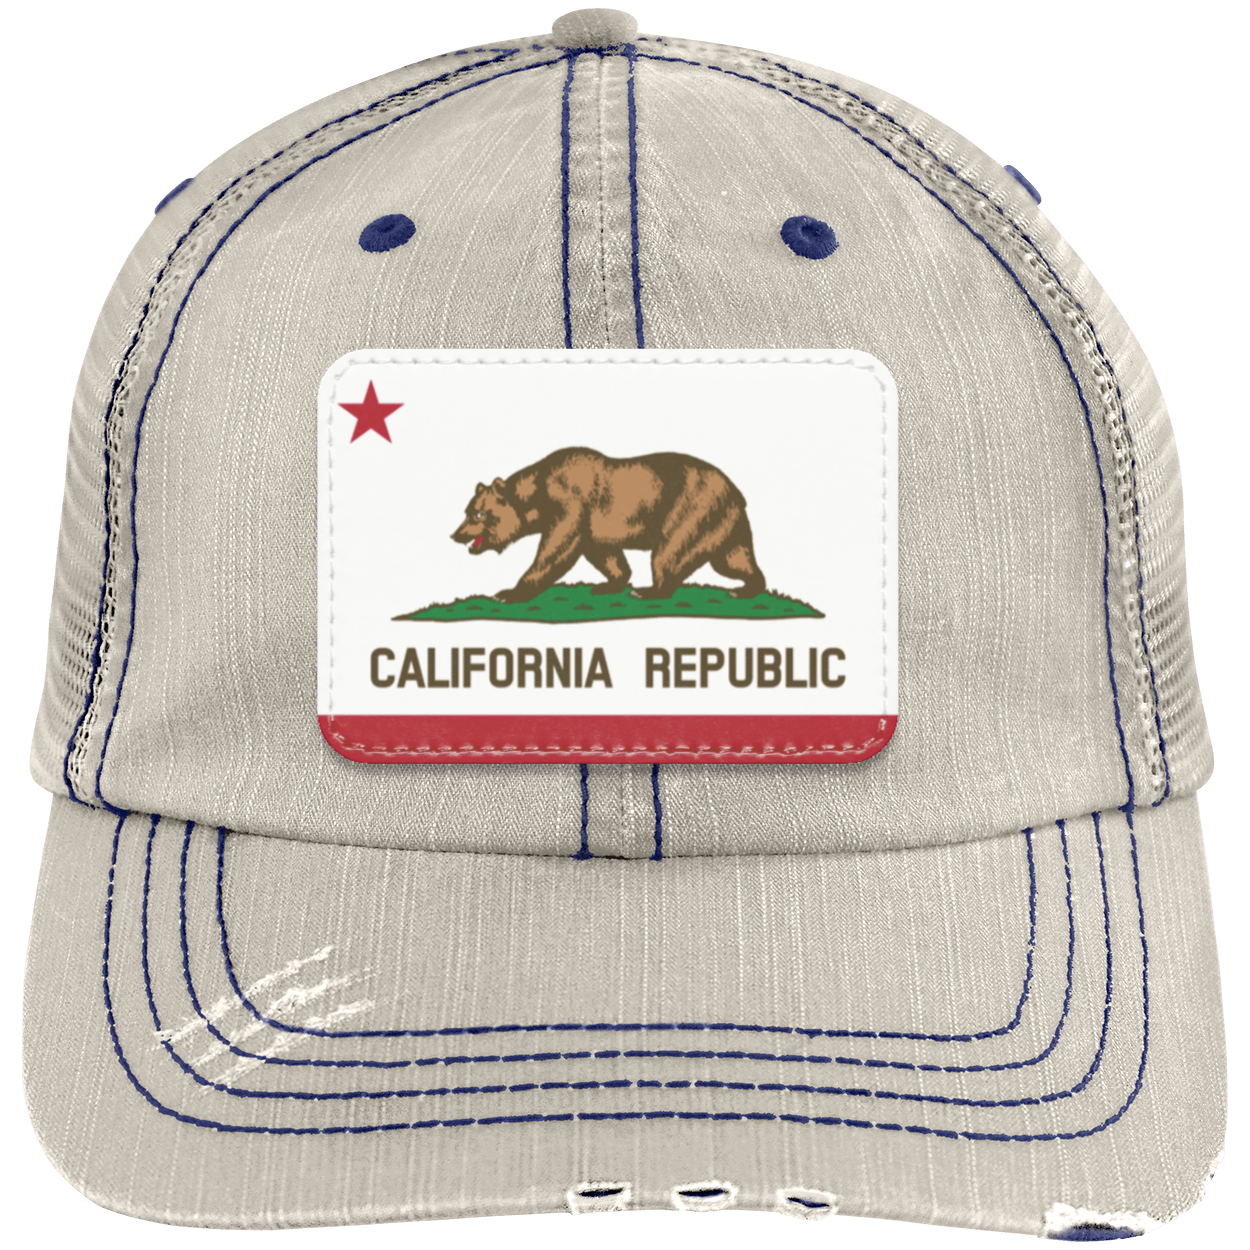 California State Flag - United States of America Distressed Unstructured Trucker Cap - Patch